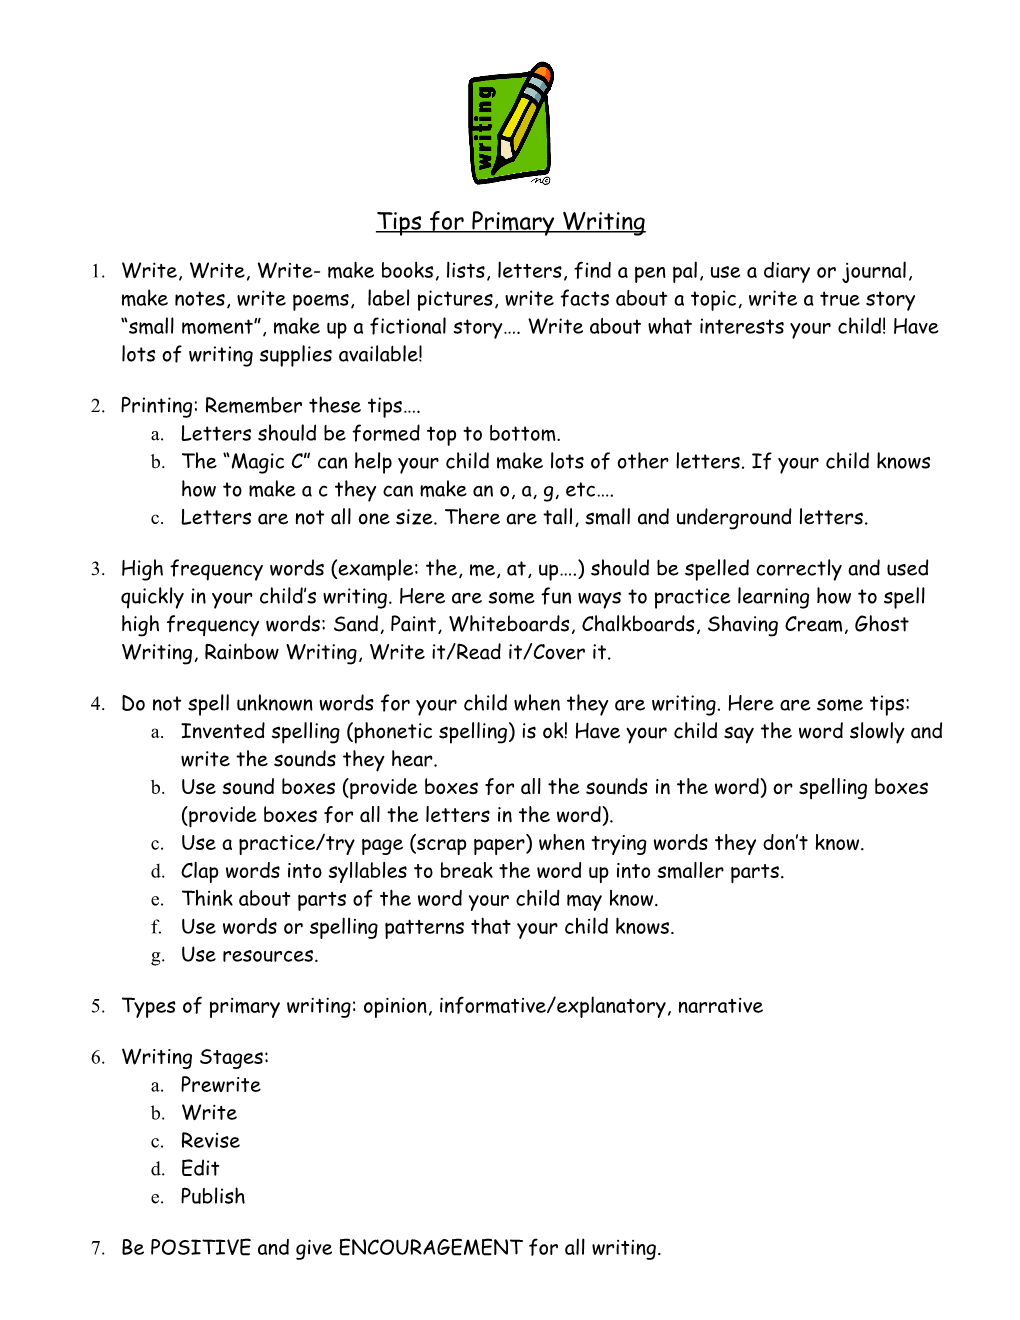 Tips for Primary Writing